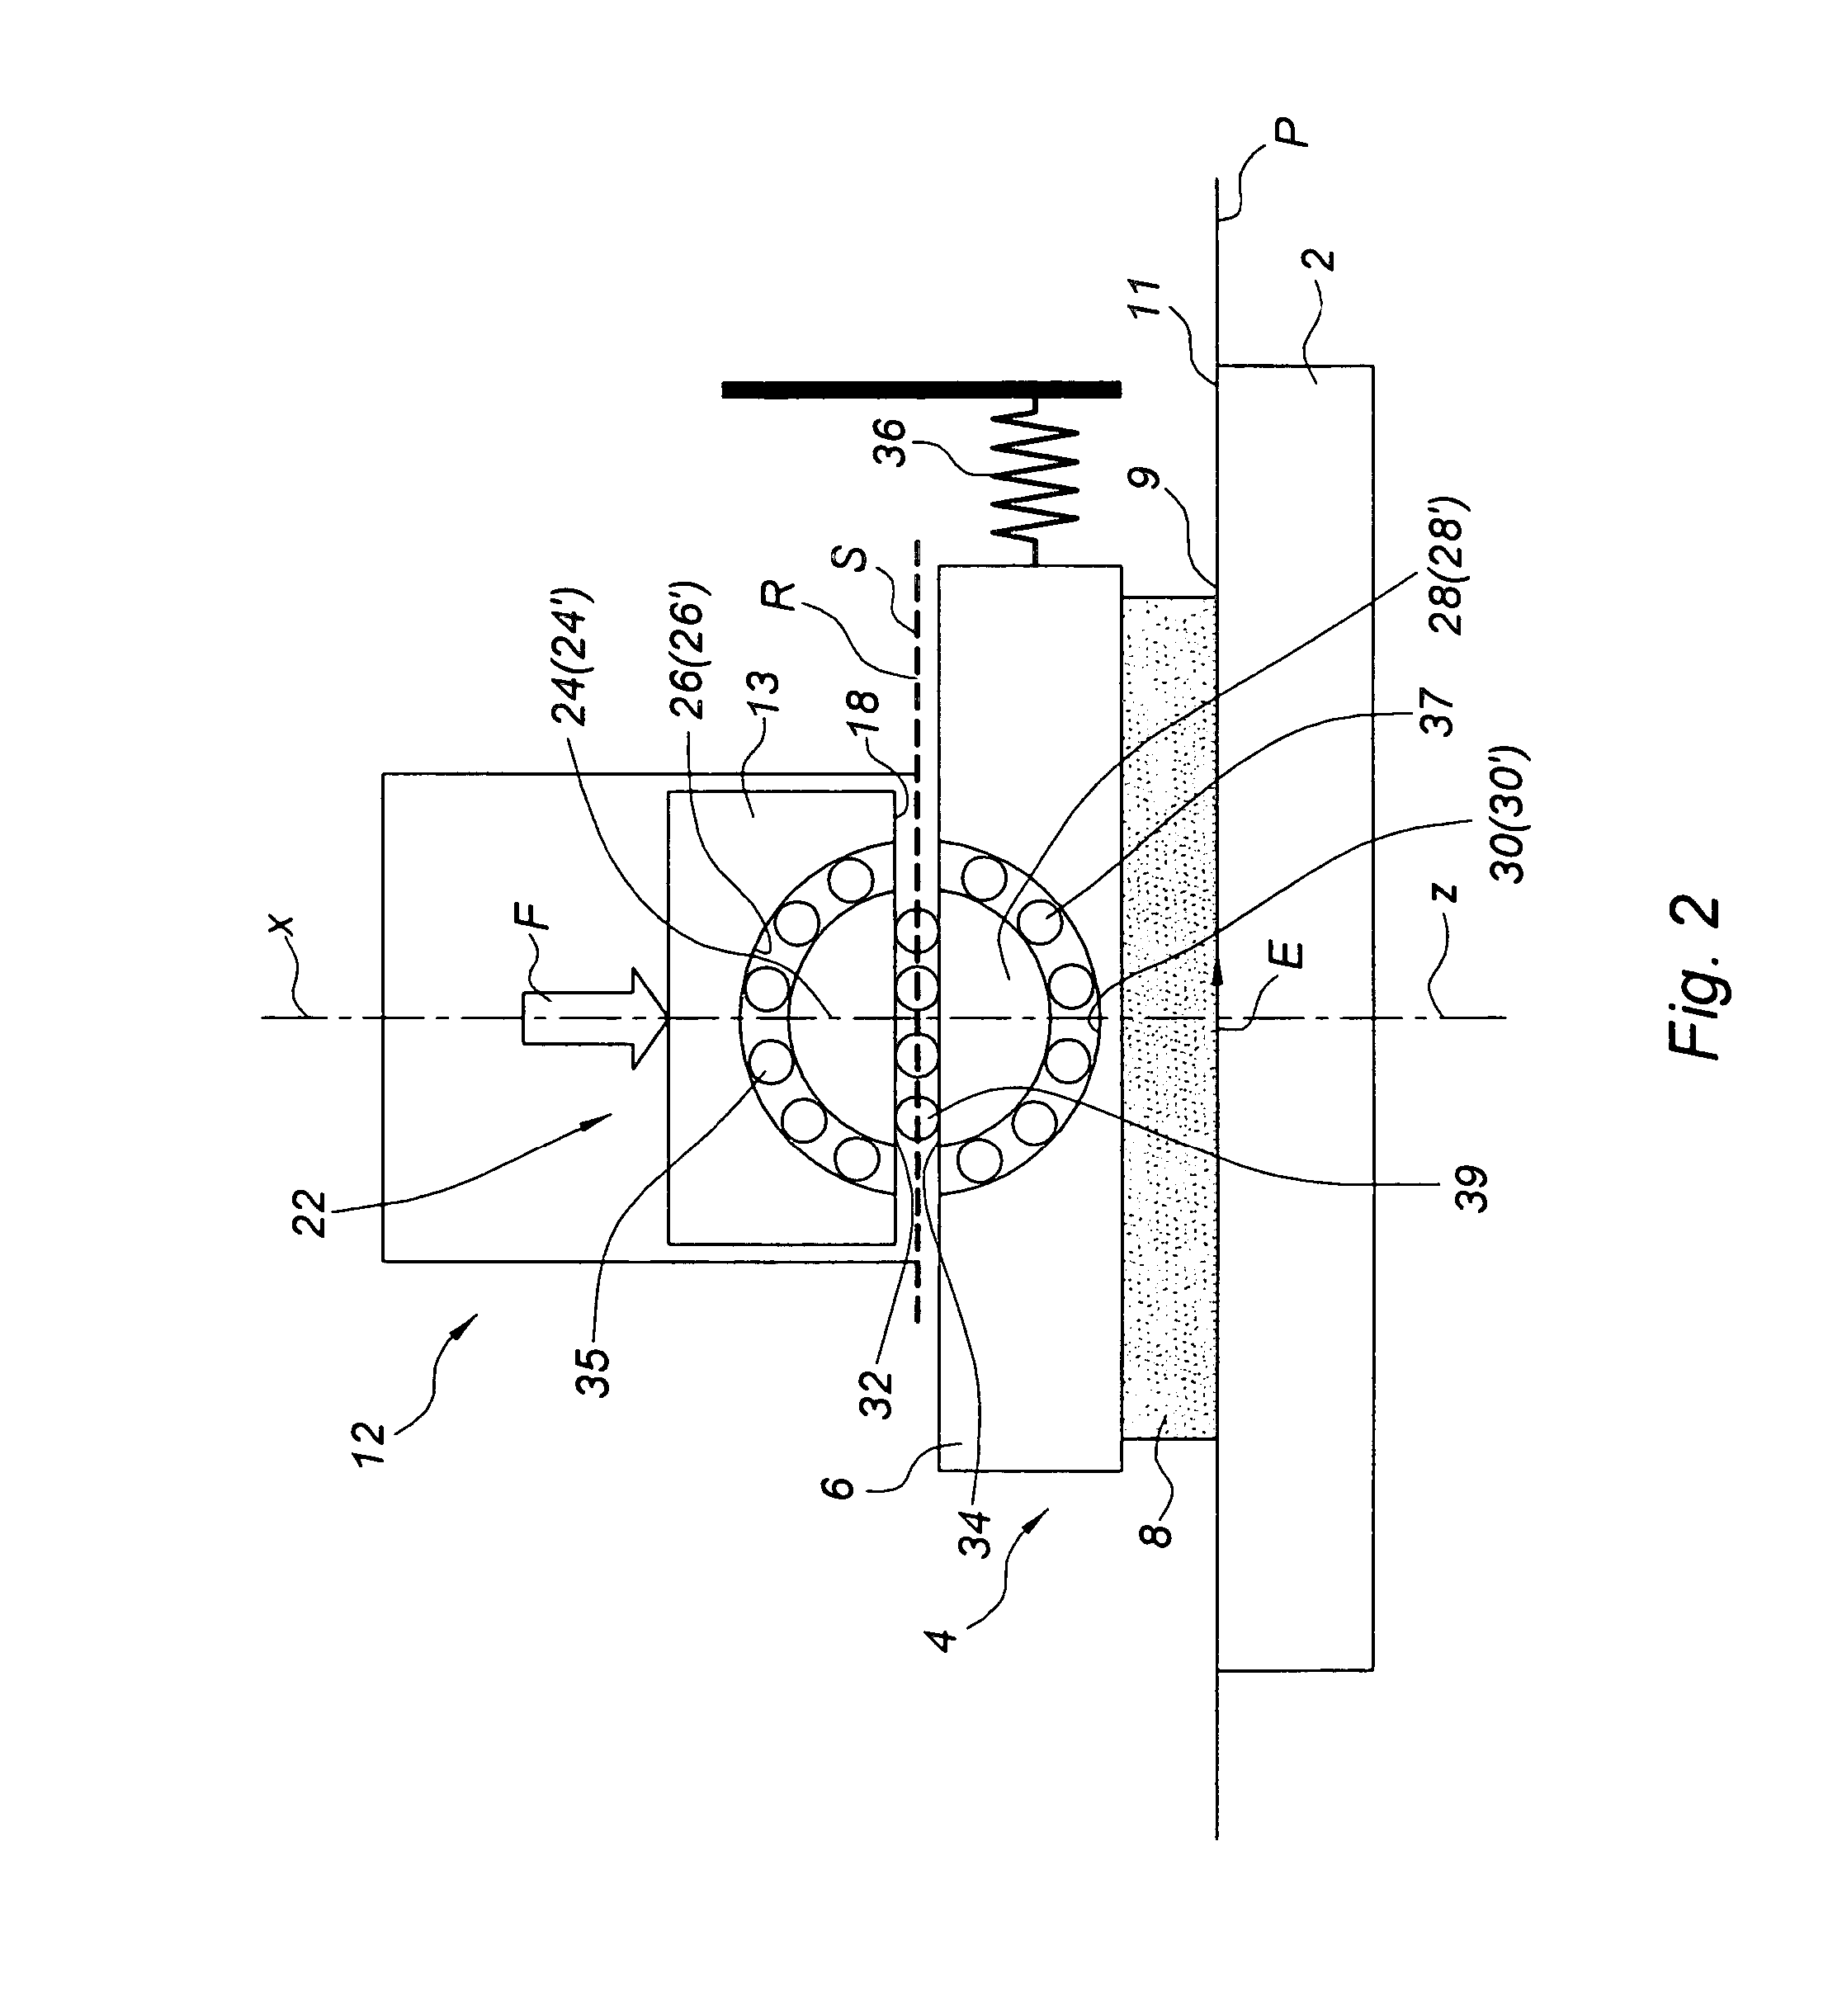 Disc brake comprising at least one inclinable brake pad